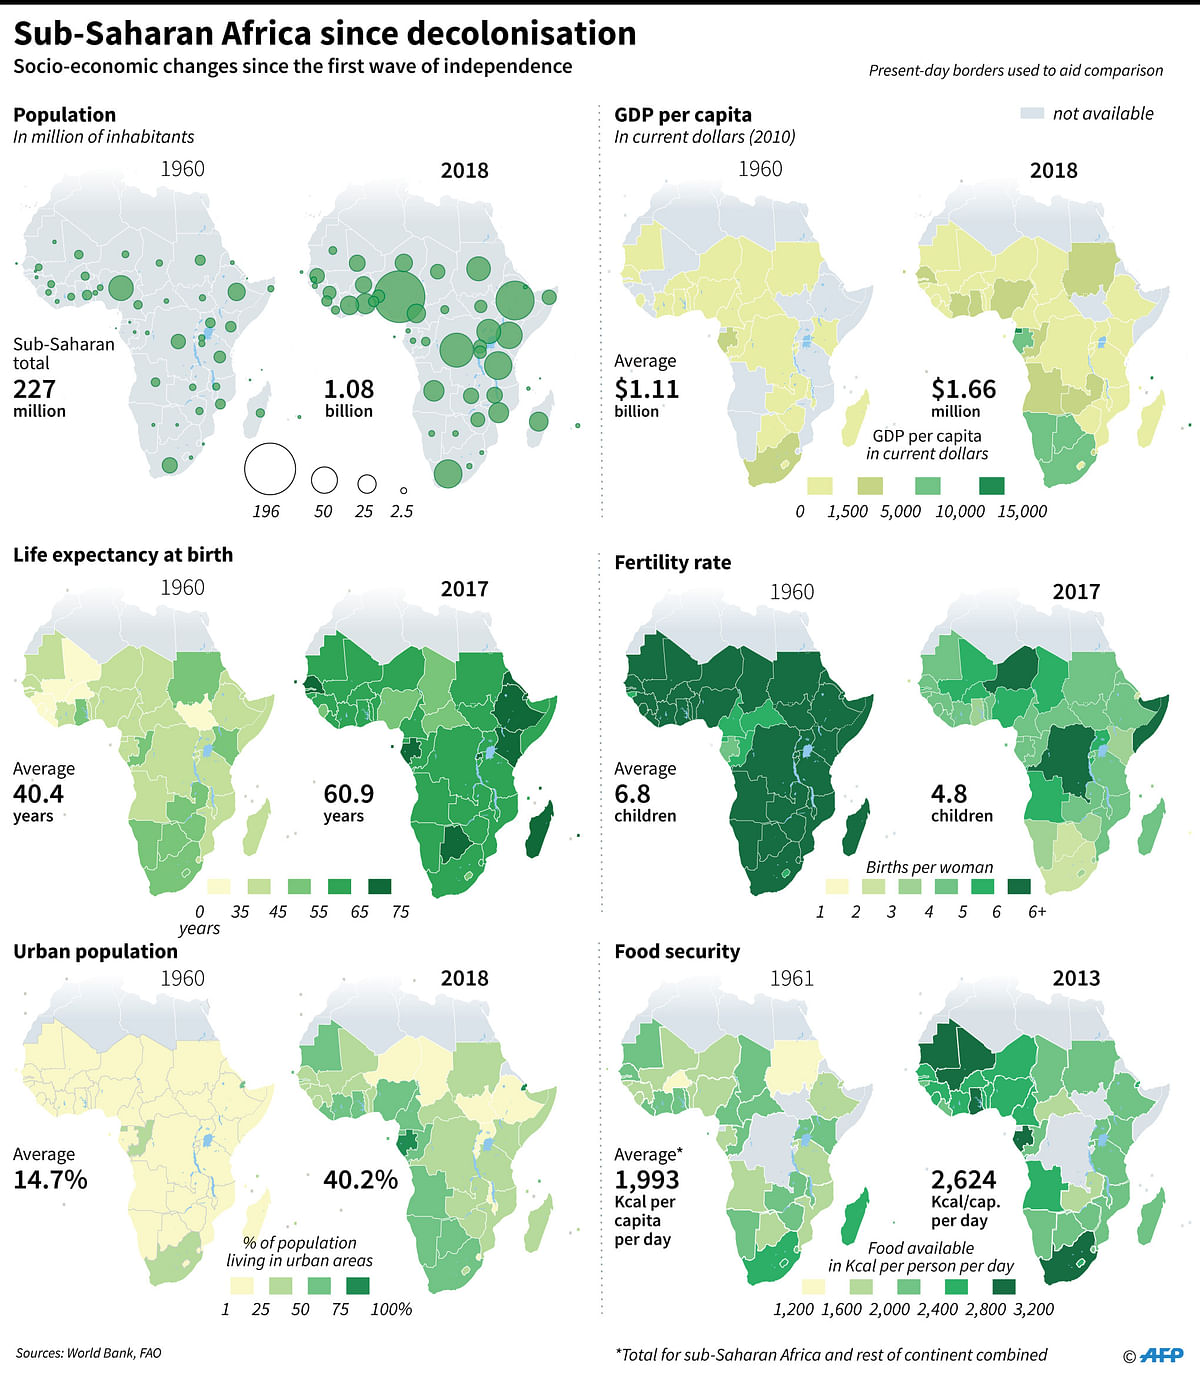 Socio-economic changes in sub-Saharan Africa since the first wave of independence. Photo: AFP